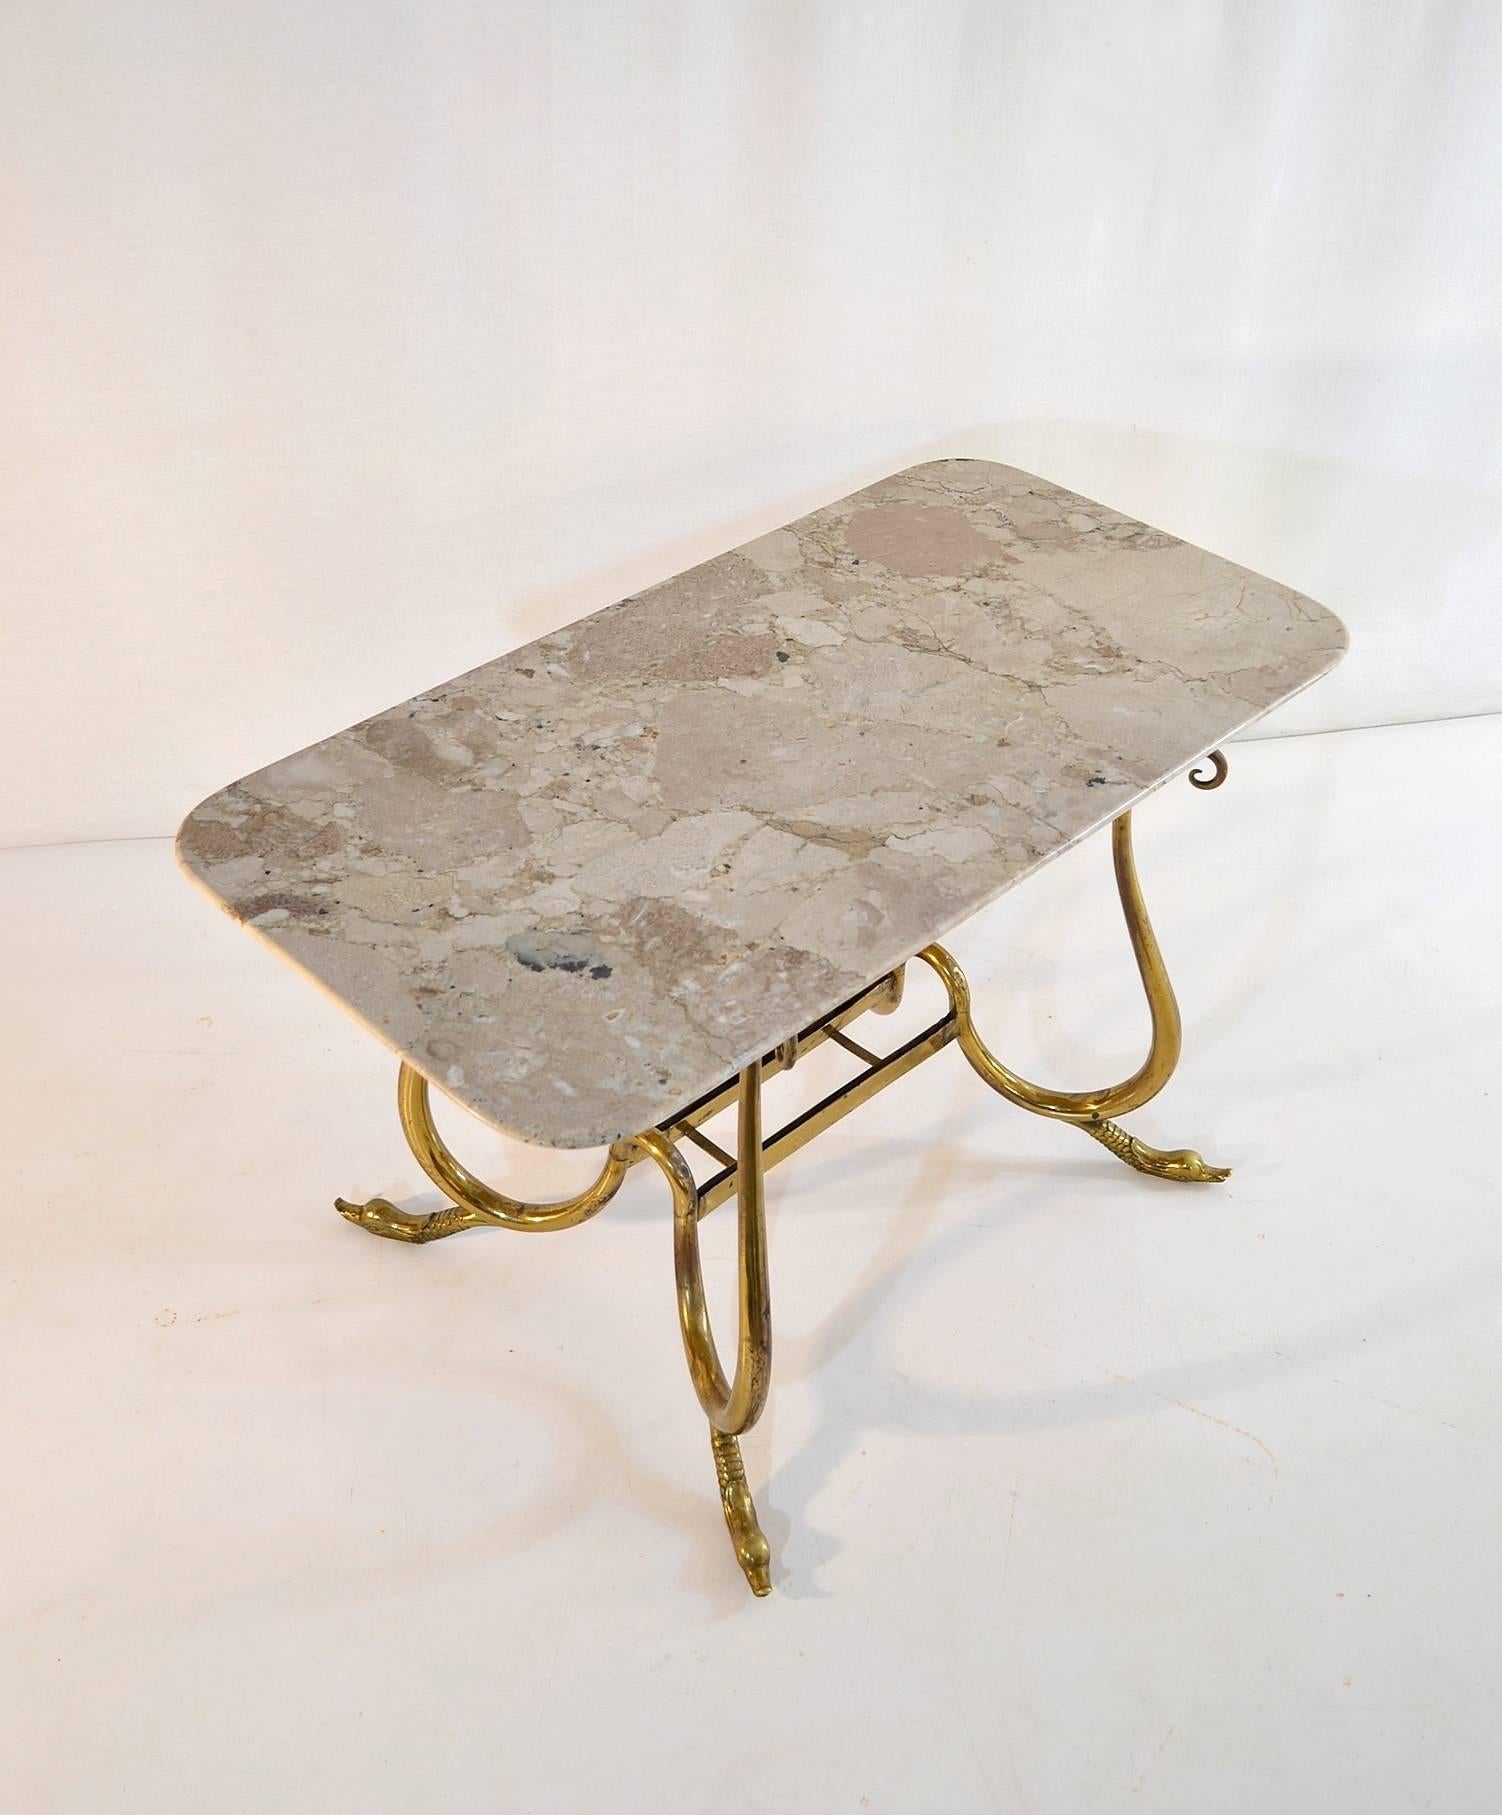 Elegant cocktail table with a sweeping design in the base in brass with swan feet and a top in a neutral beige marble. Designed and produced sometime during the 1950s.